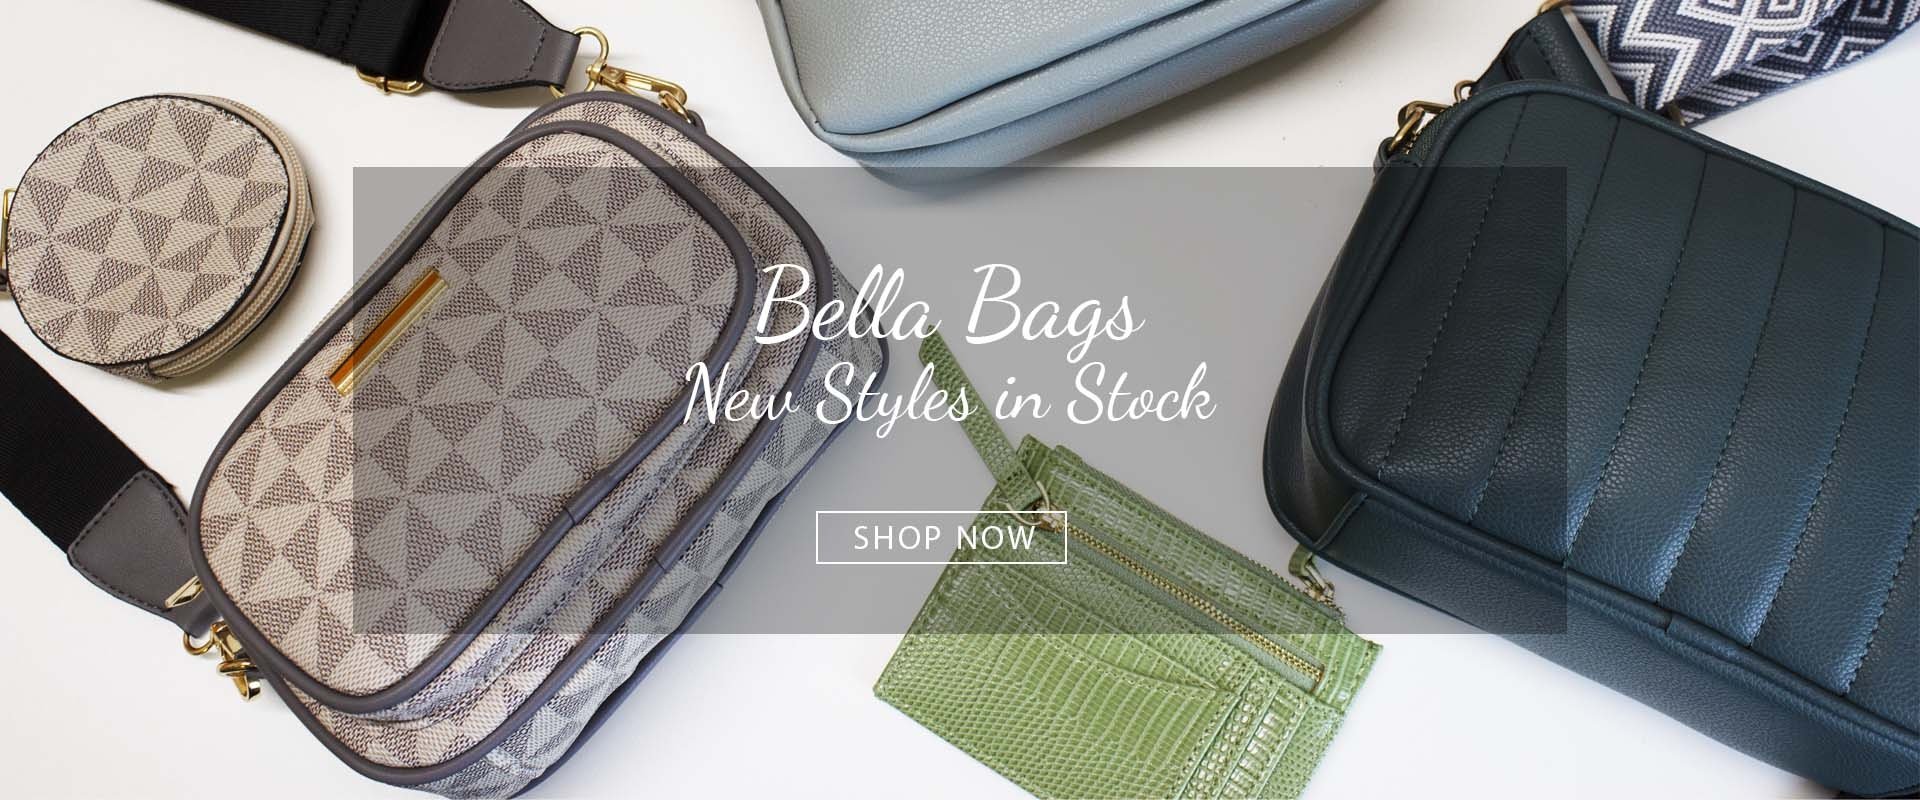 Welcome to Bella Bags | Bella Bags